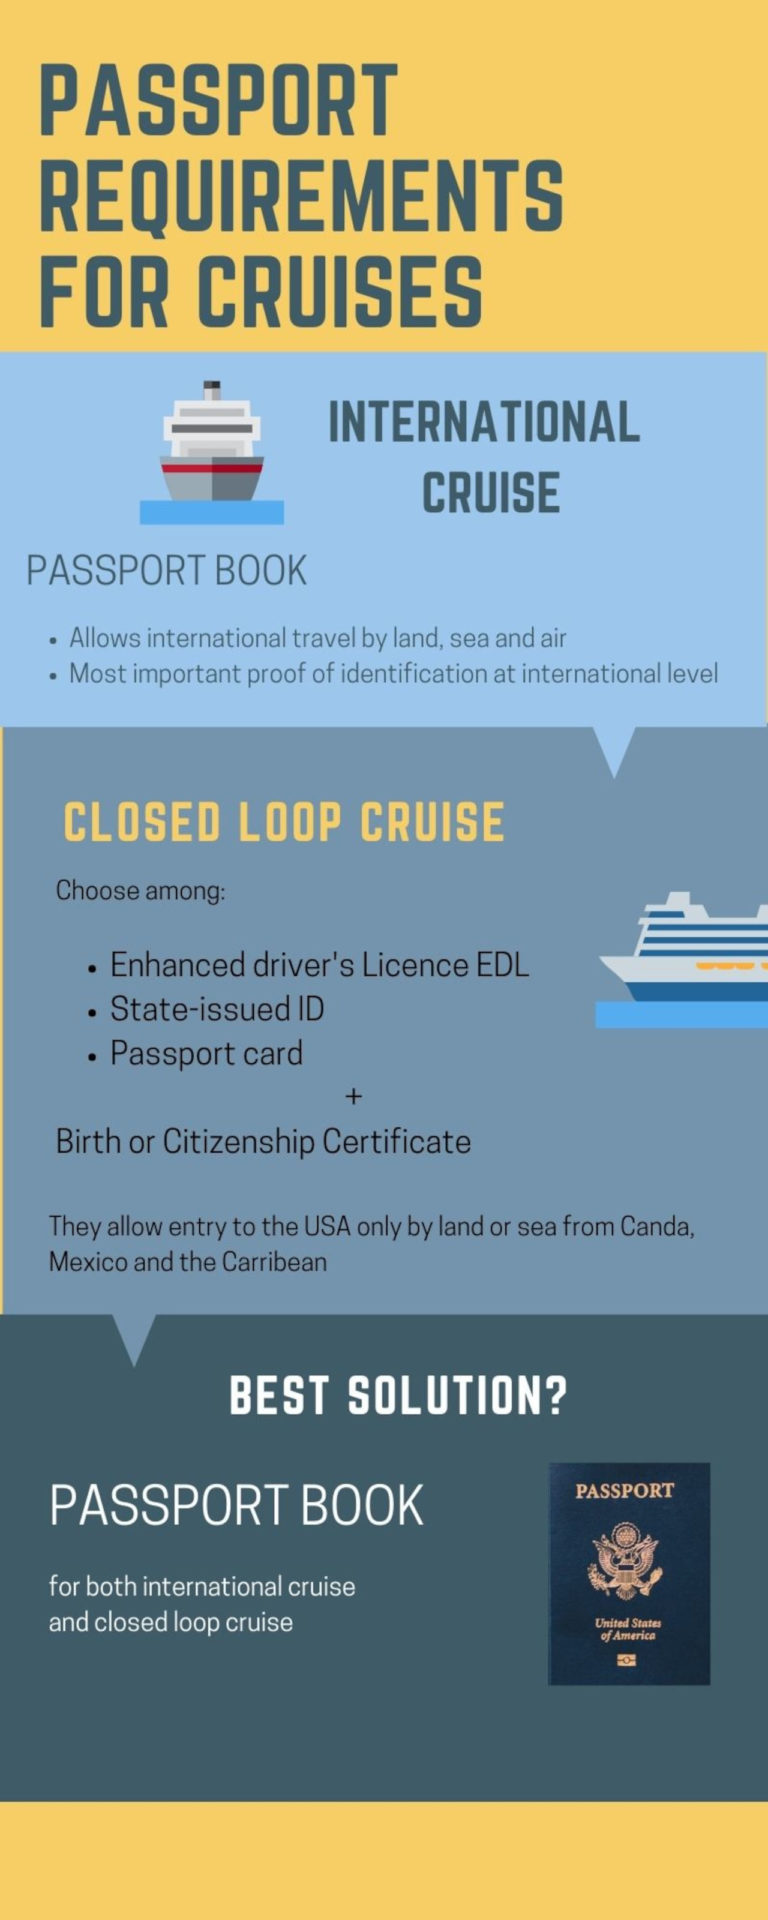 Passport Requirements for Cruises